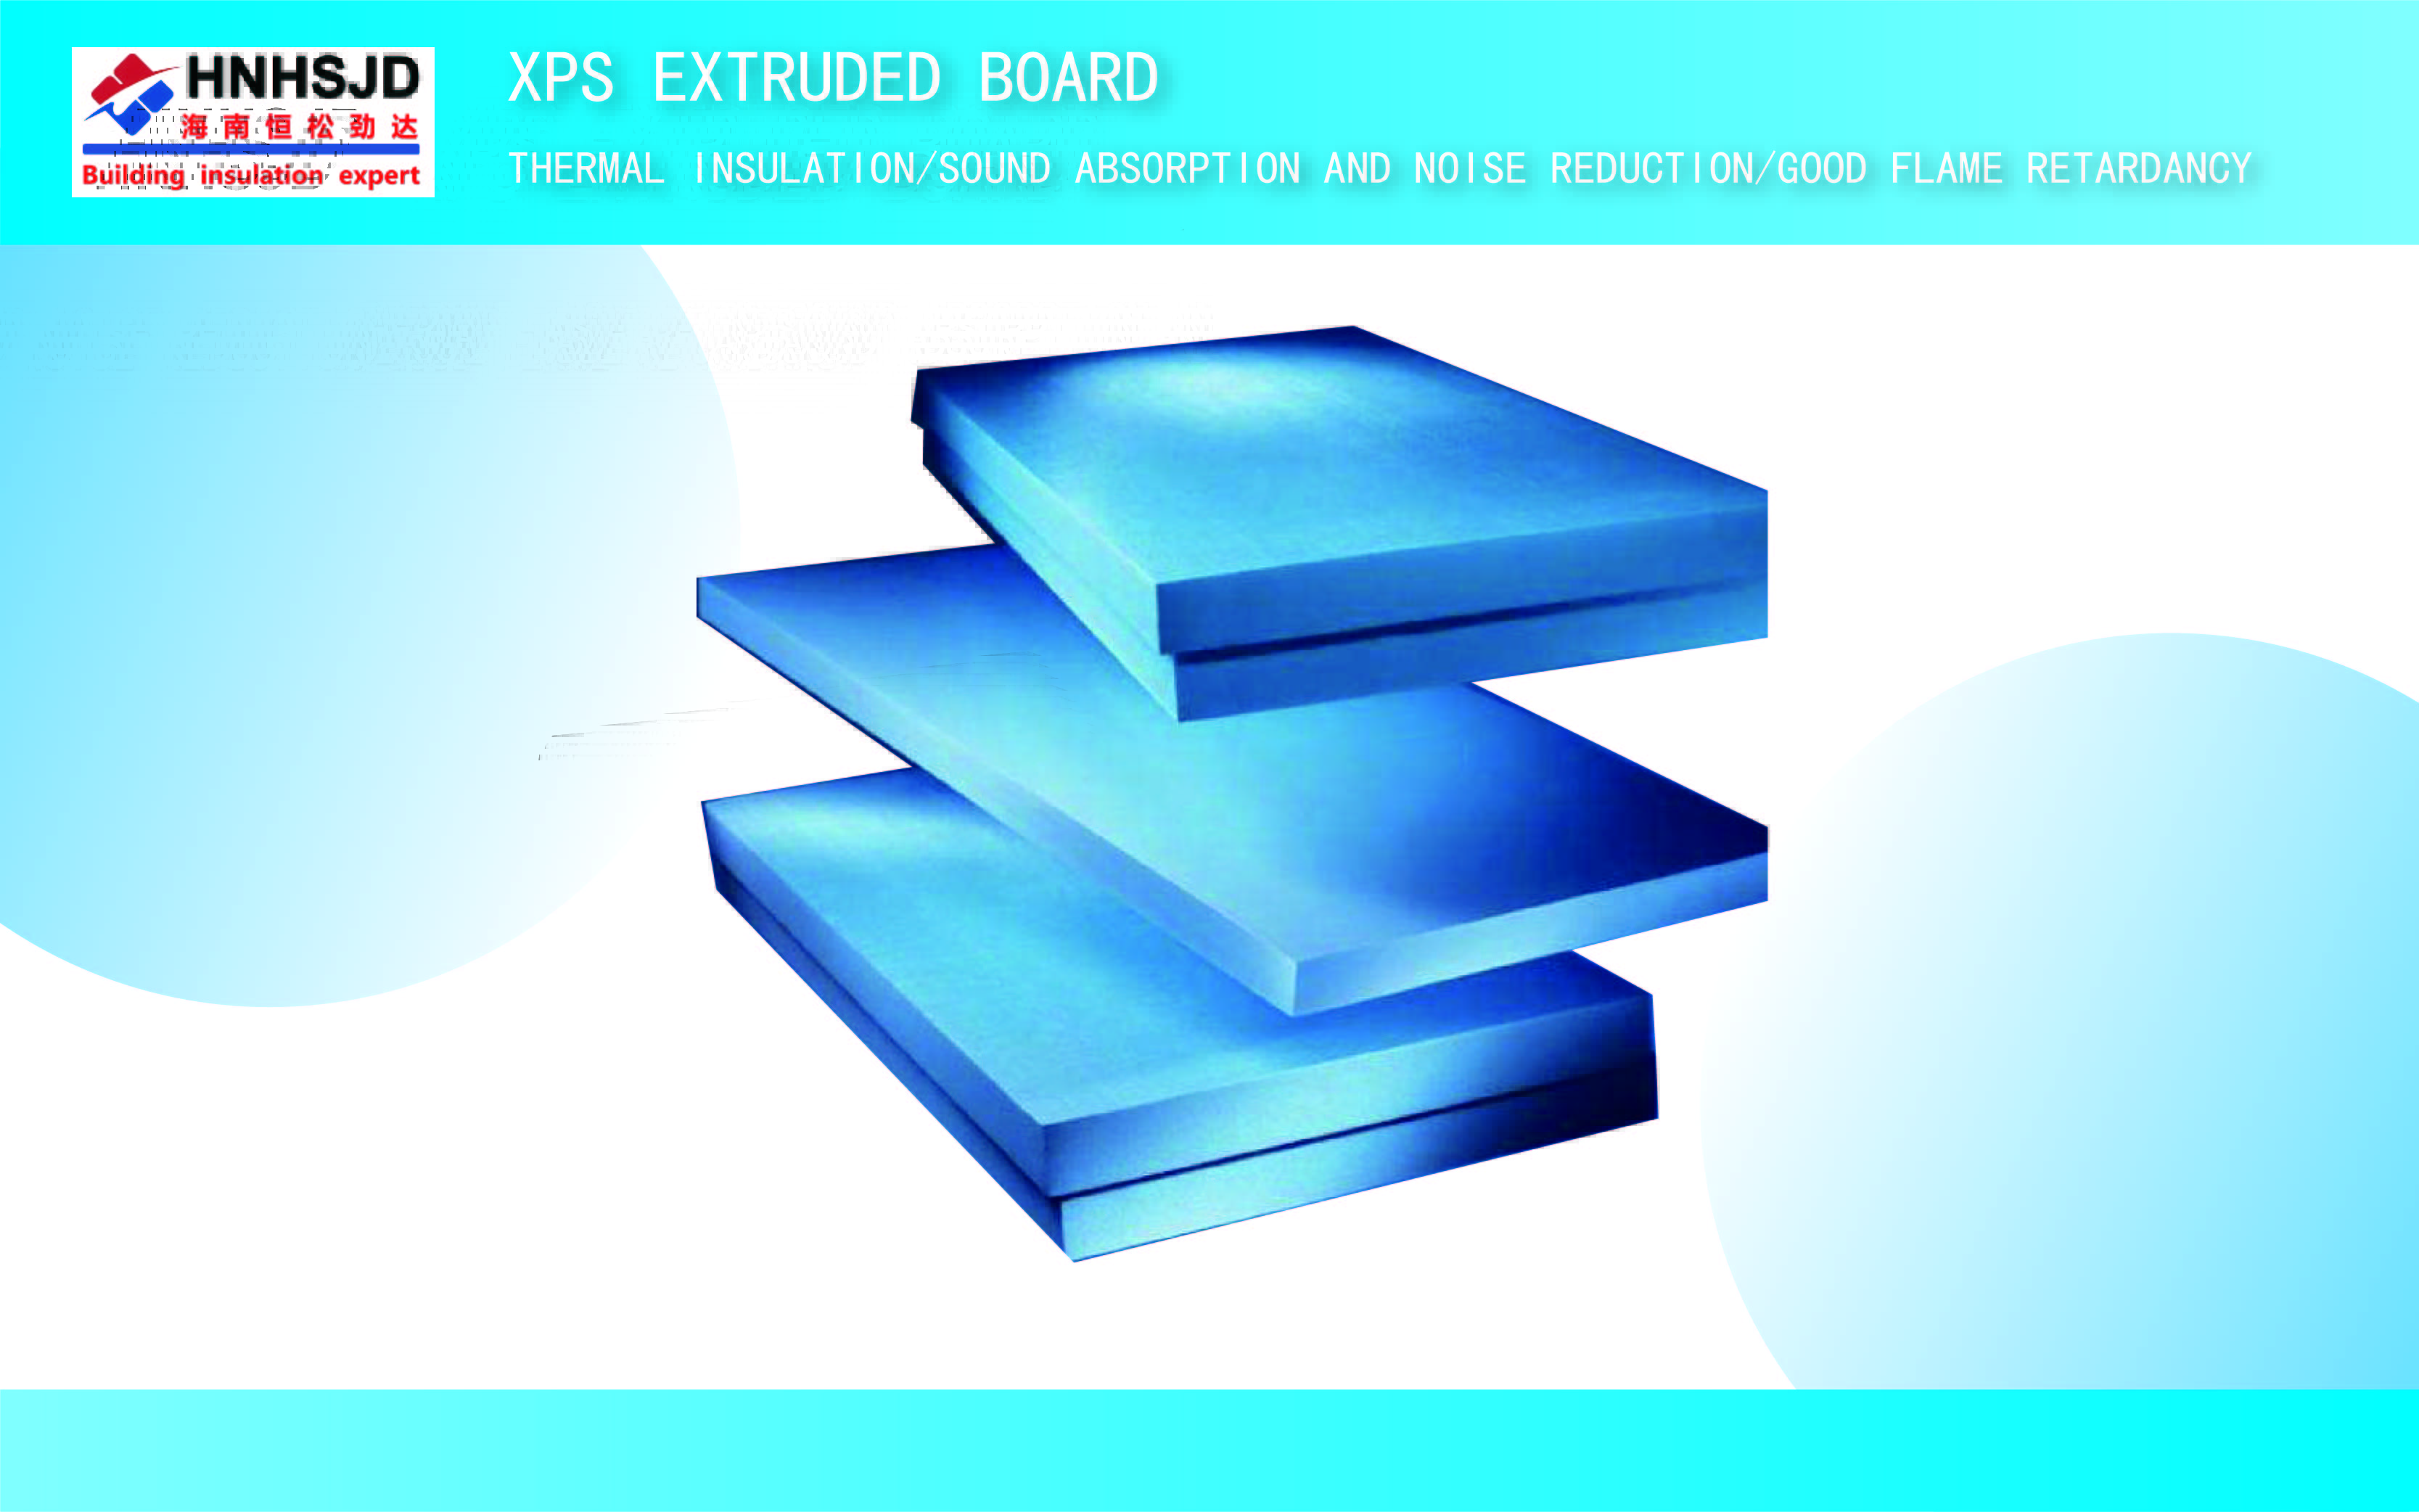 XPS extruded board